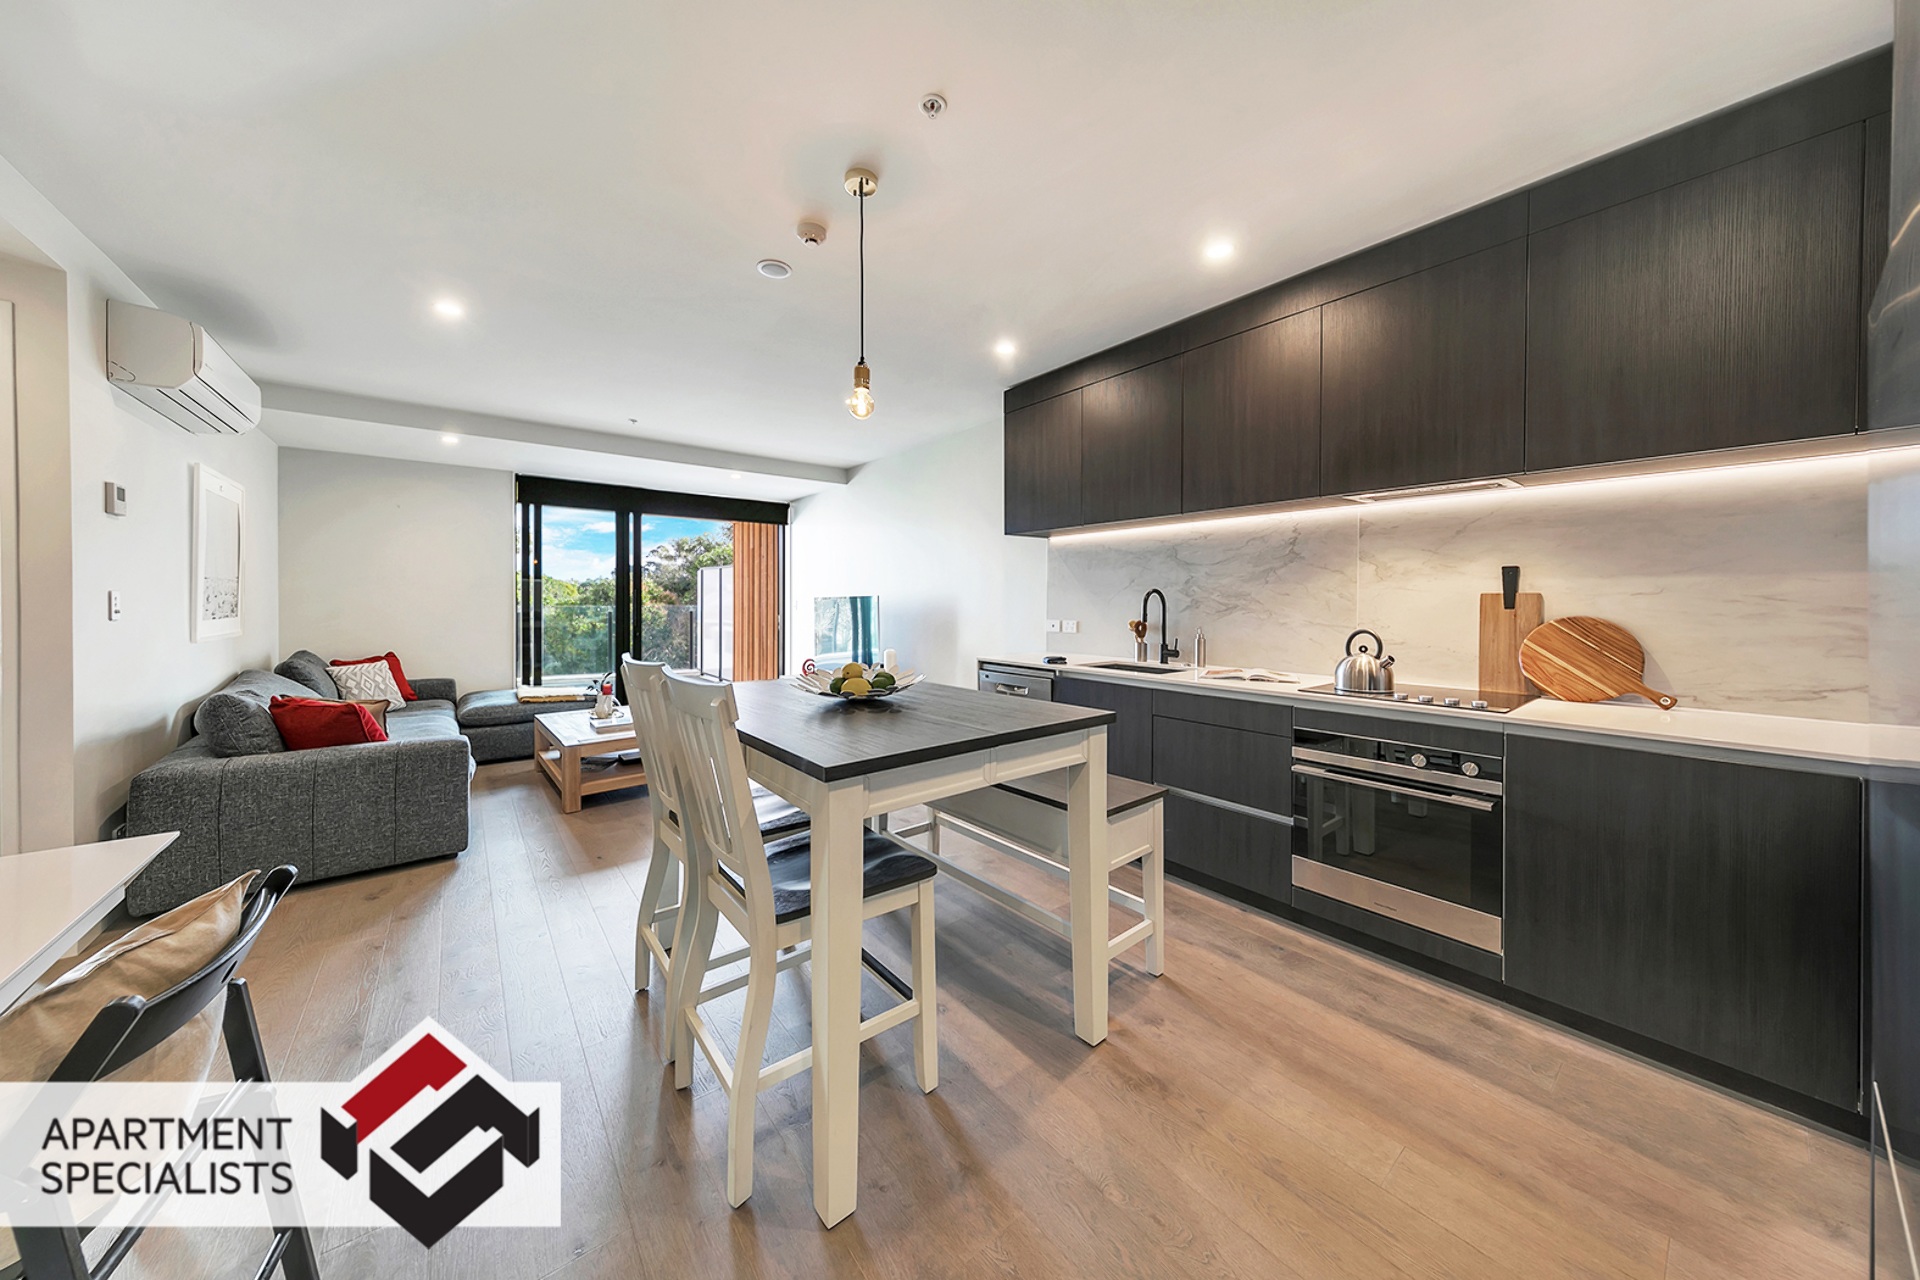 2 | 8 Central Road, Kingsland | Apartment Specialists